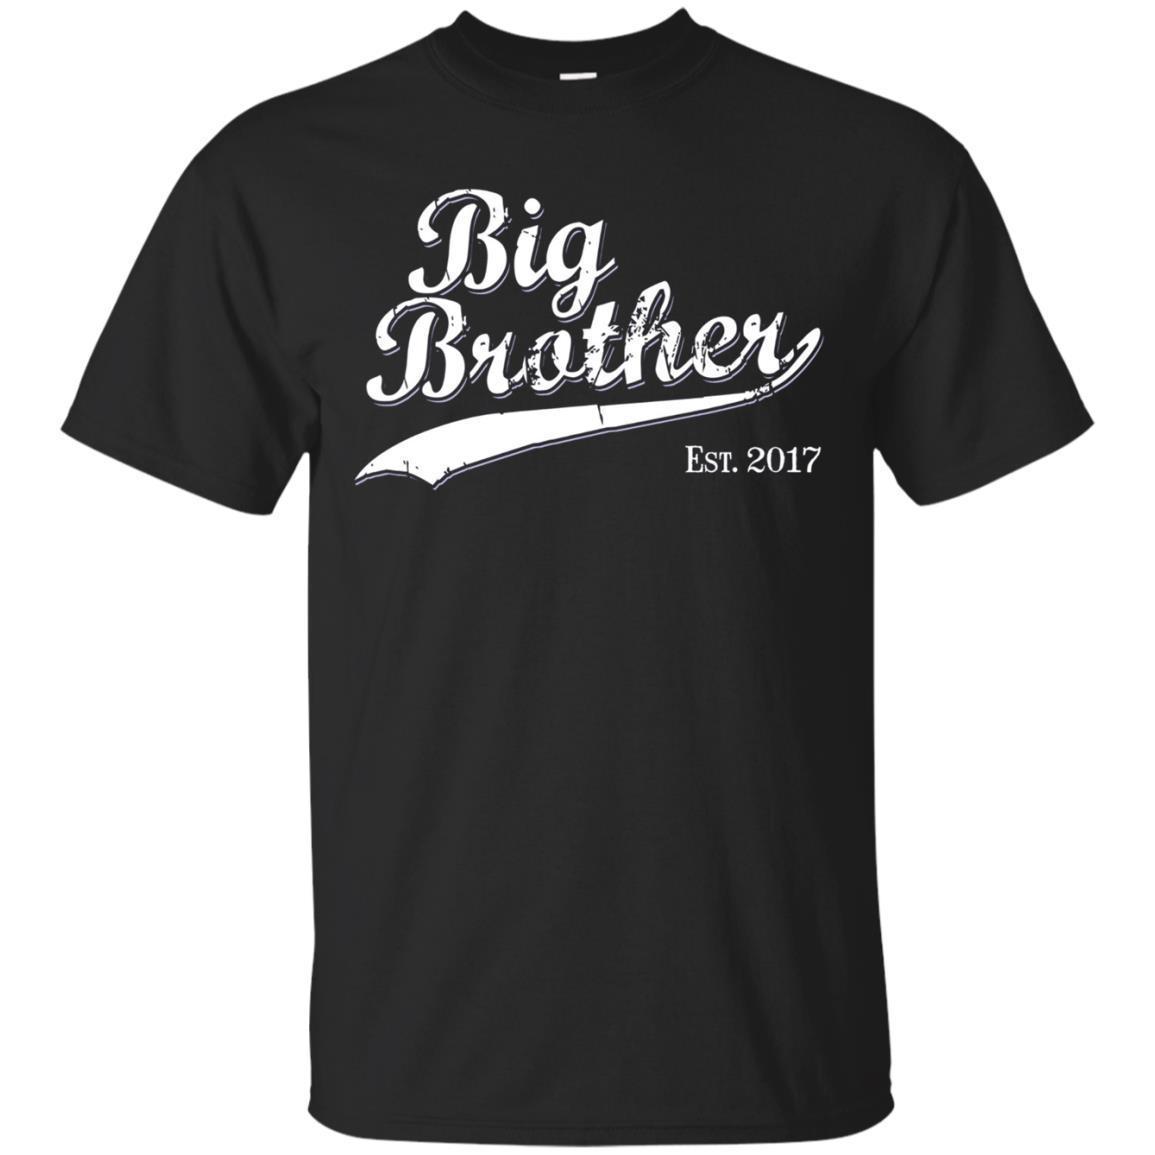 Buy Big Brother Est 2017 Gift T-shirt For New Brother Tshirt